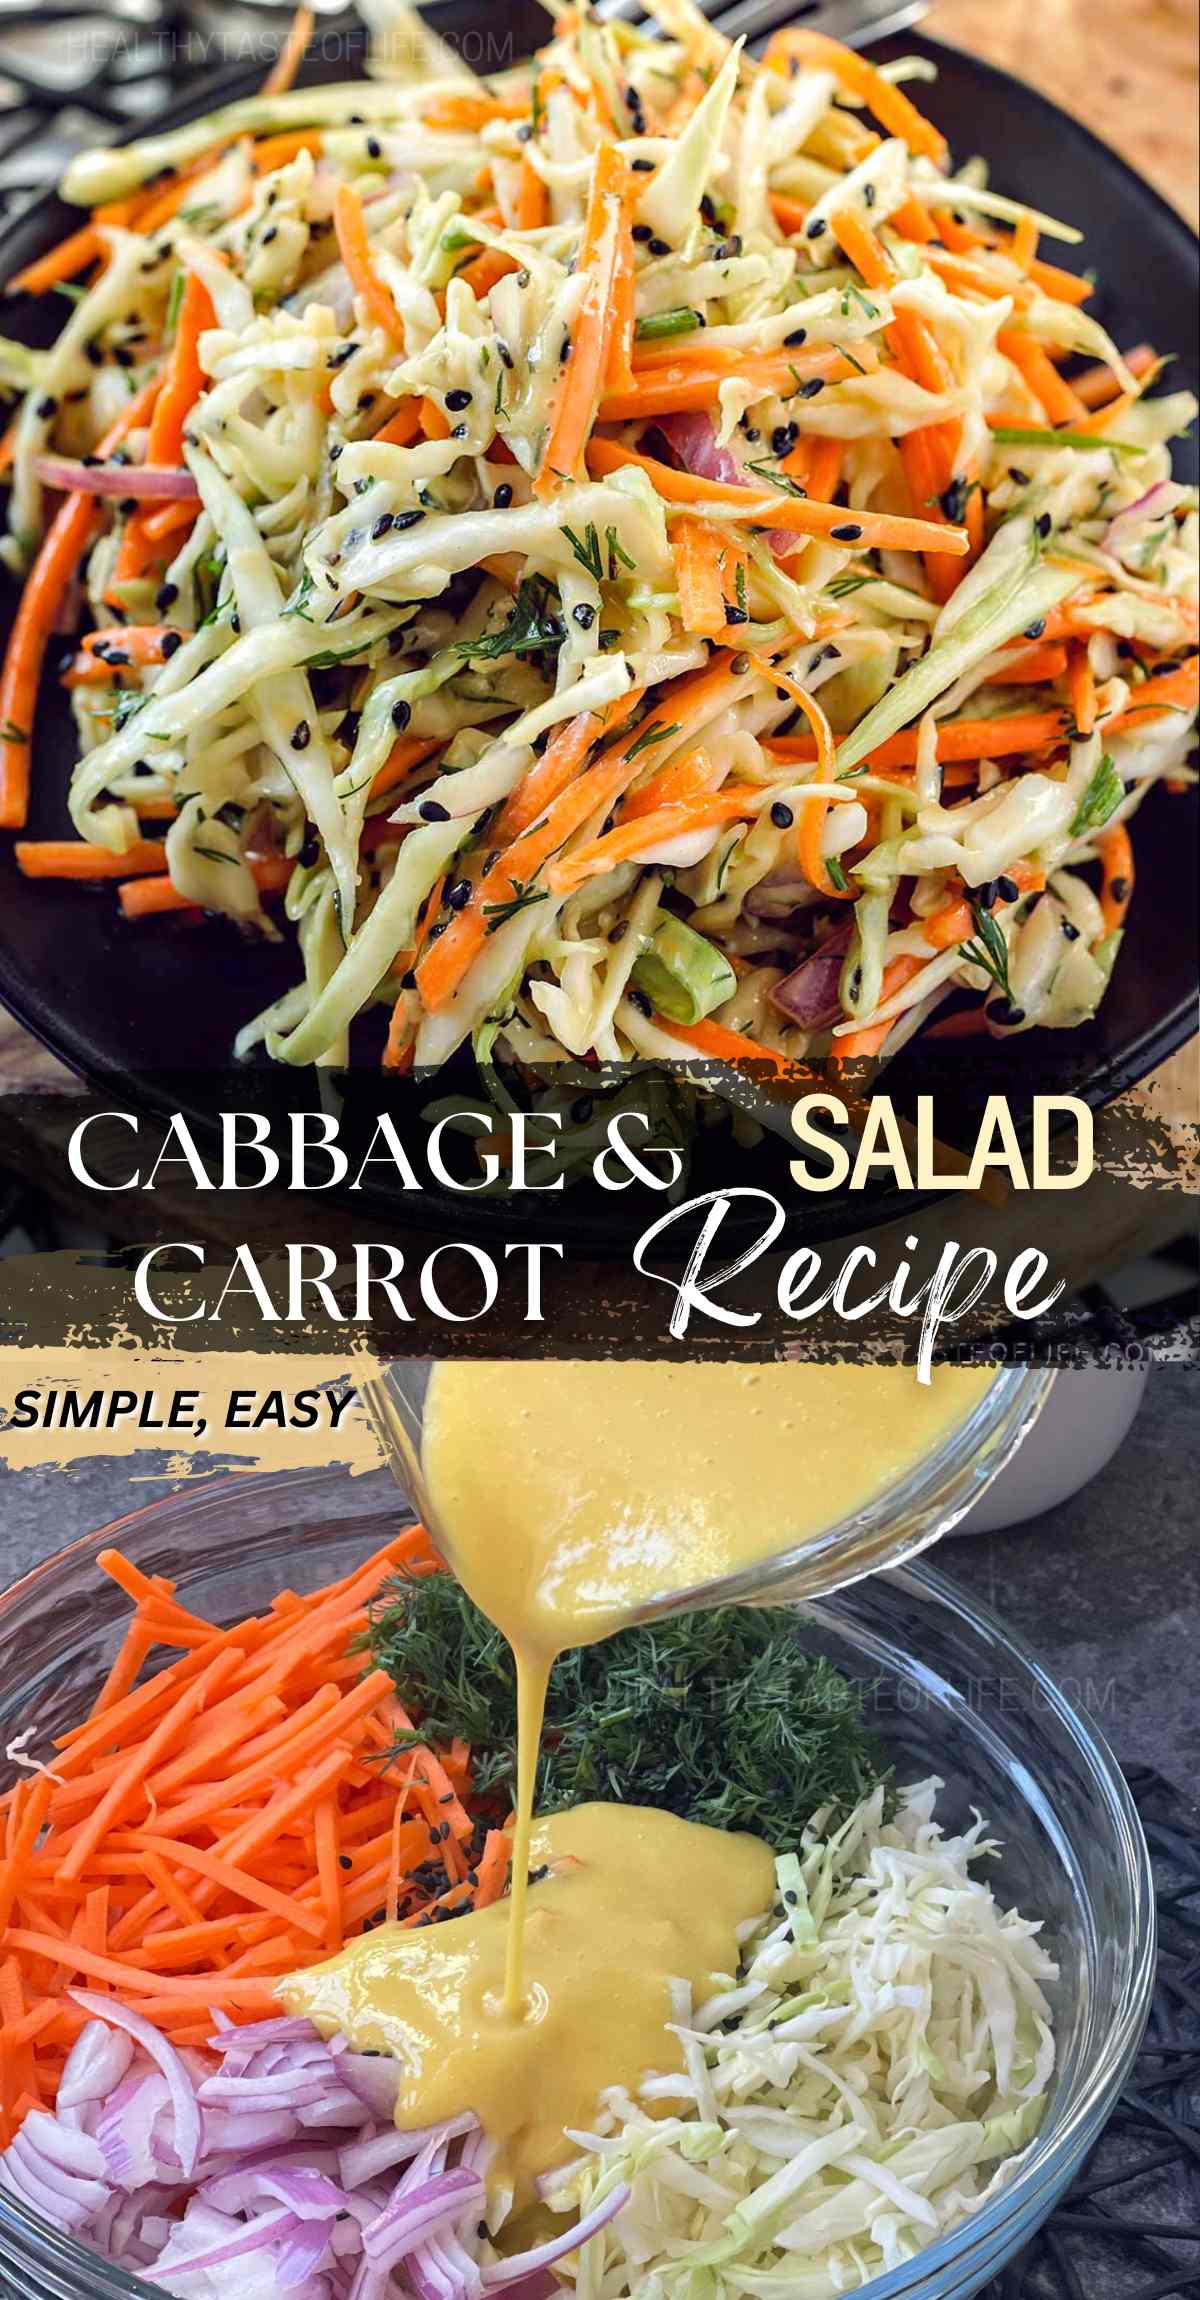 This easy simple cabbage and carrot salad recipe features crisp shredded green cabbage and sweet julienned carrots, all brought together with a creamy and tangy mustard dressing similar to a colesalw, making it a tasty and nutritious side dish for any meal. This carrot and cabbage salad goes well with any grilled meats or use it as a topping for tacos or sandwiches. 